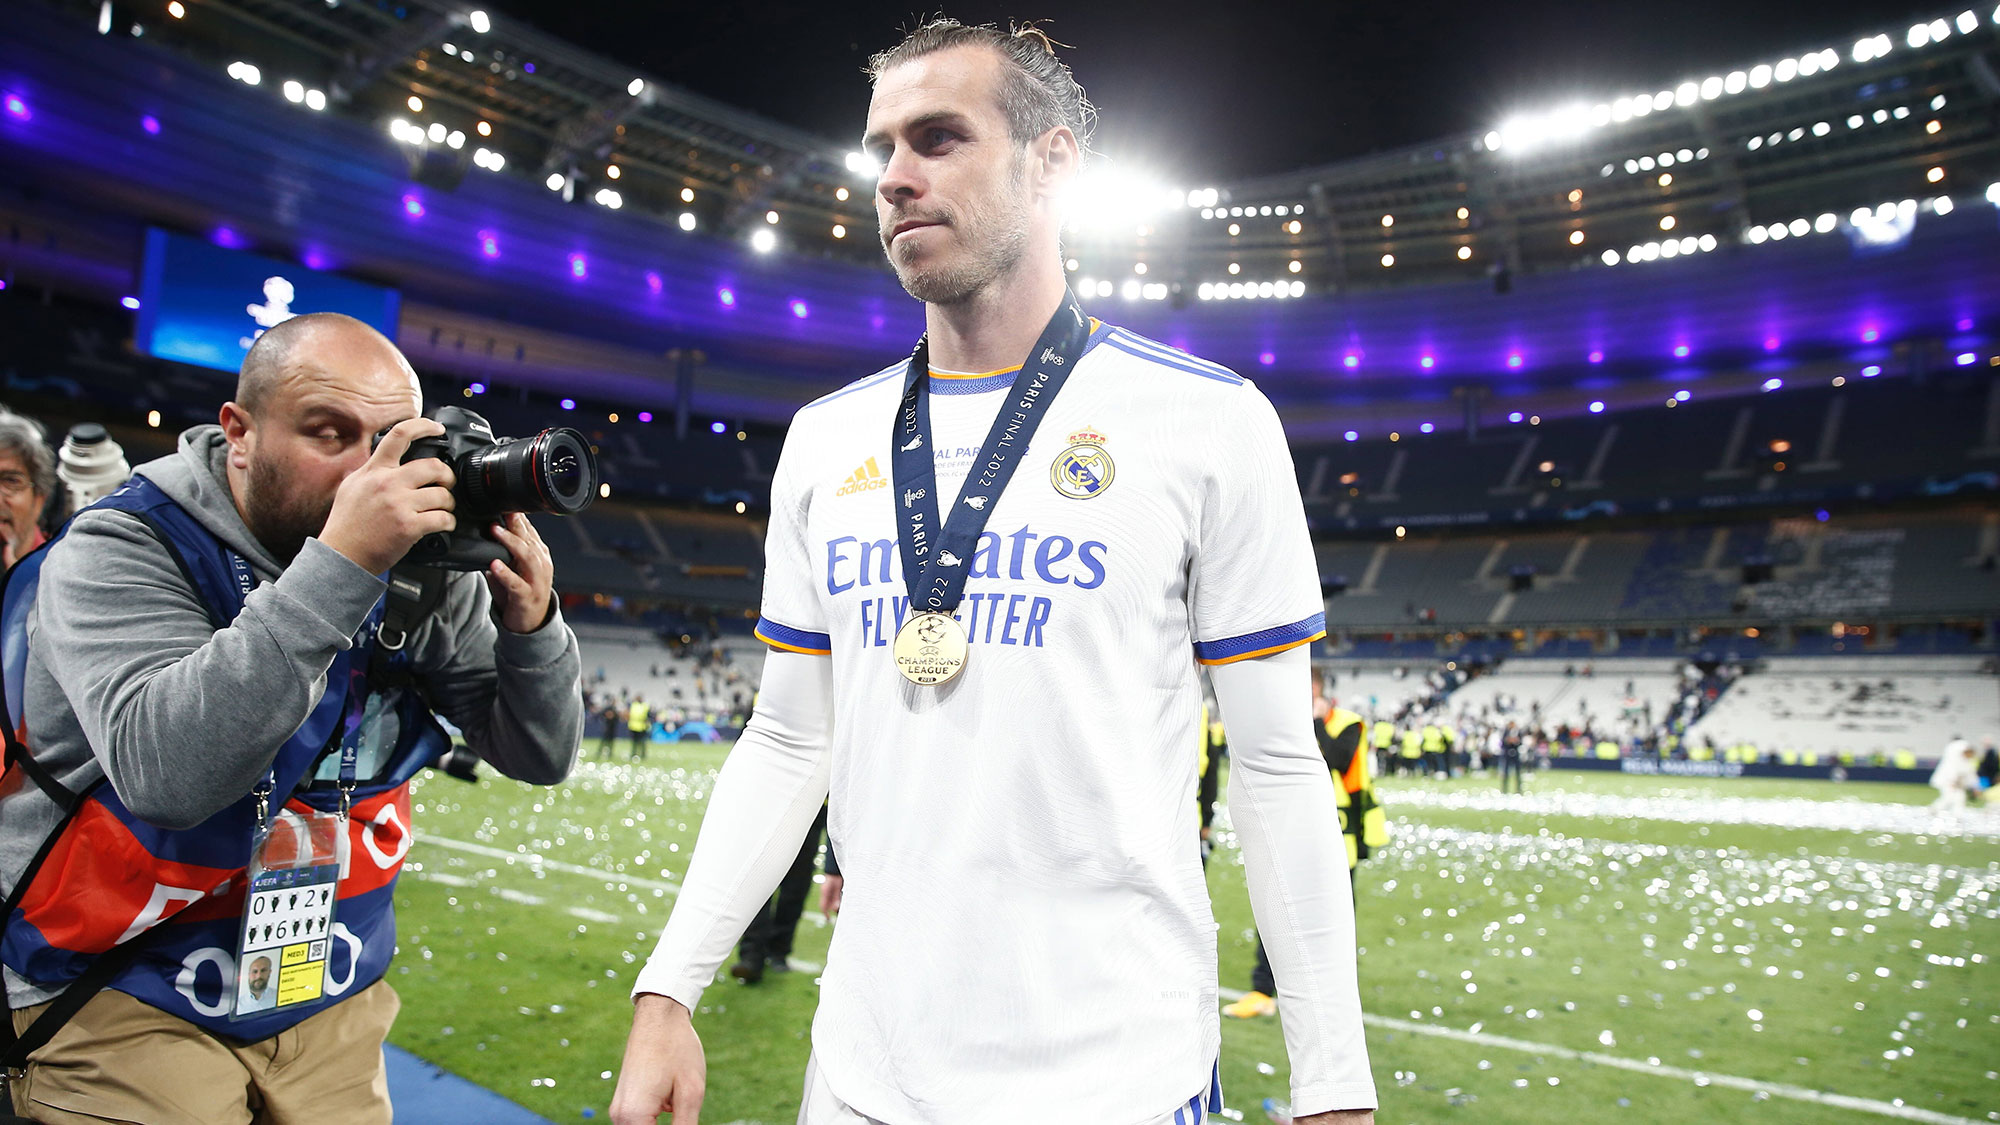 Ignore record fee Real Madrid paid for Gareth Bale, Cristiano